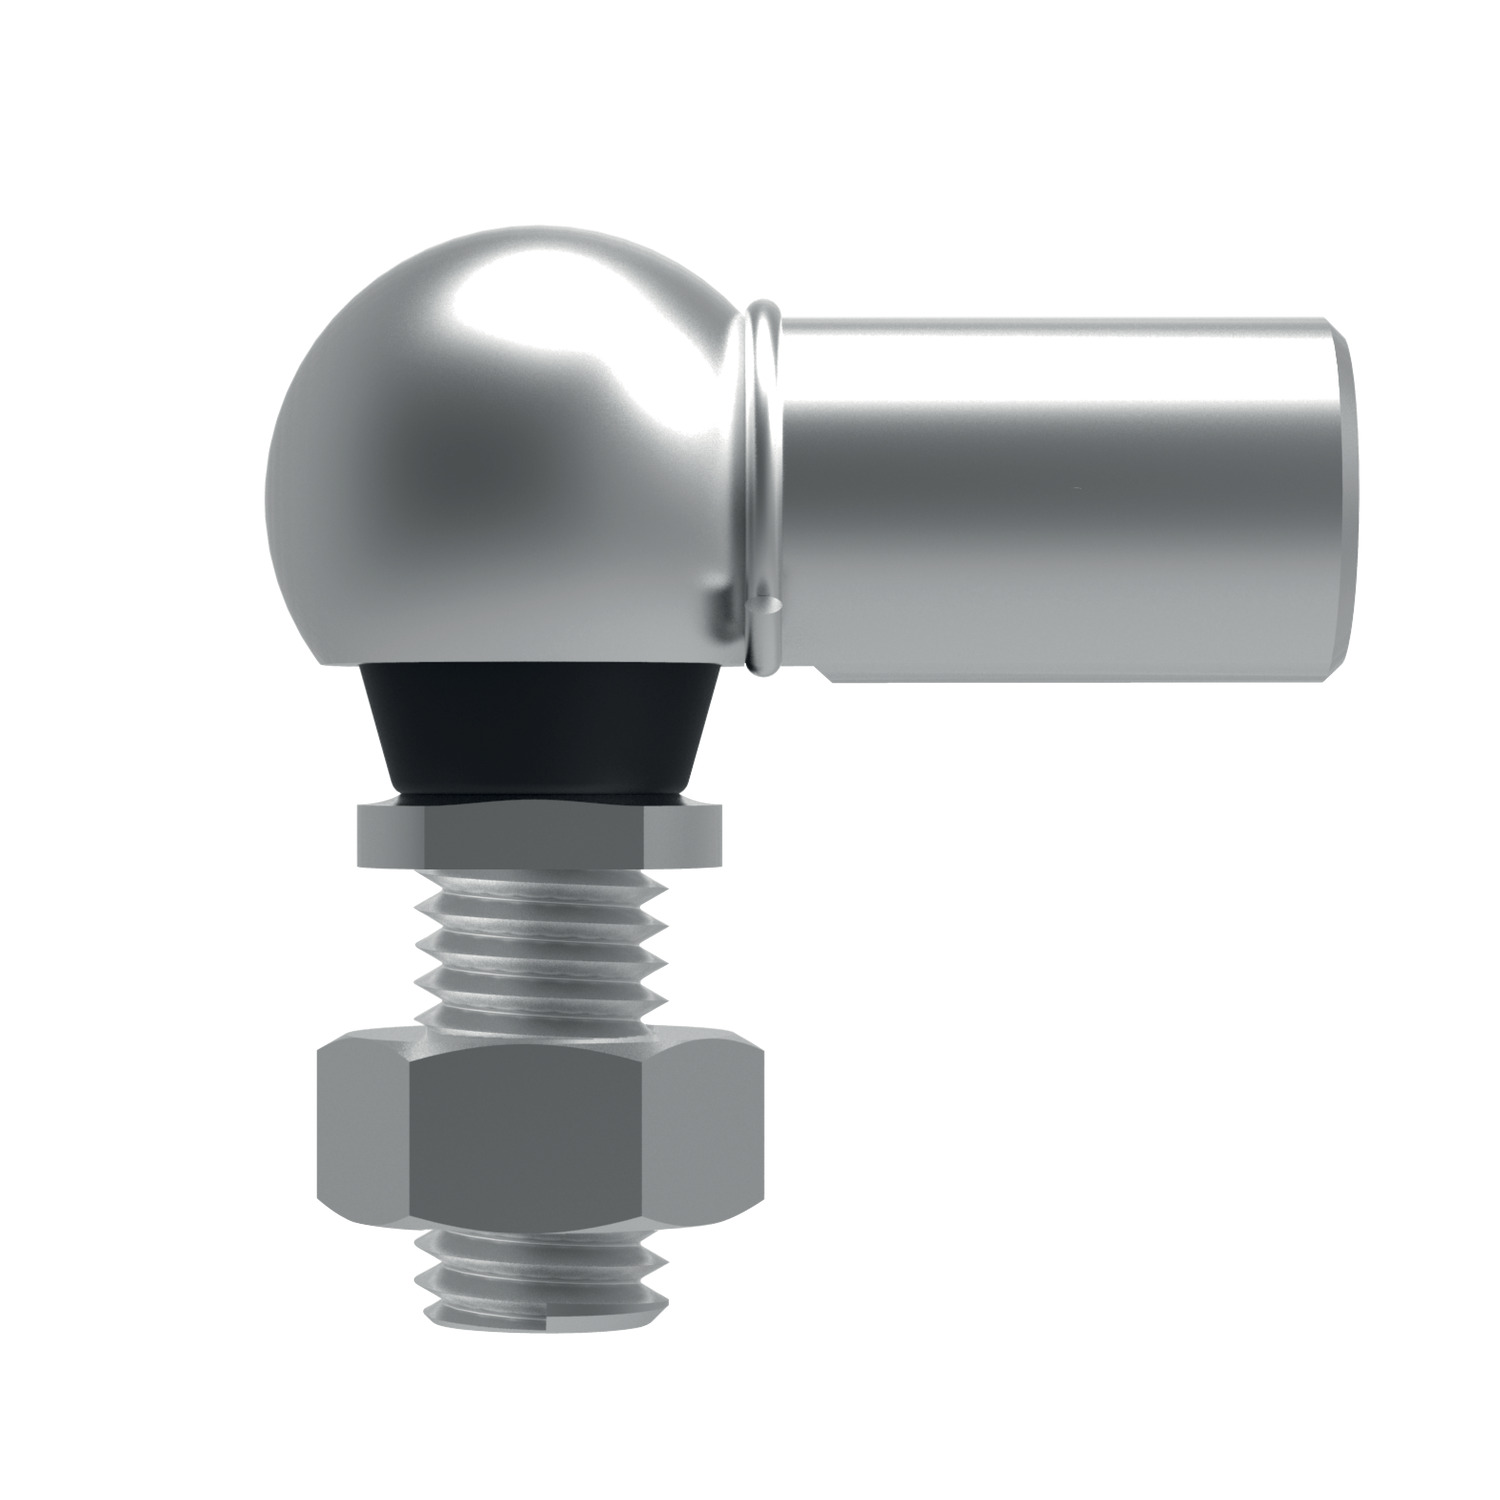 Product R3471, Ball and Socket Joints with sealing cap - left hand thread / 